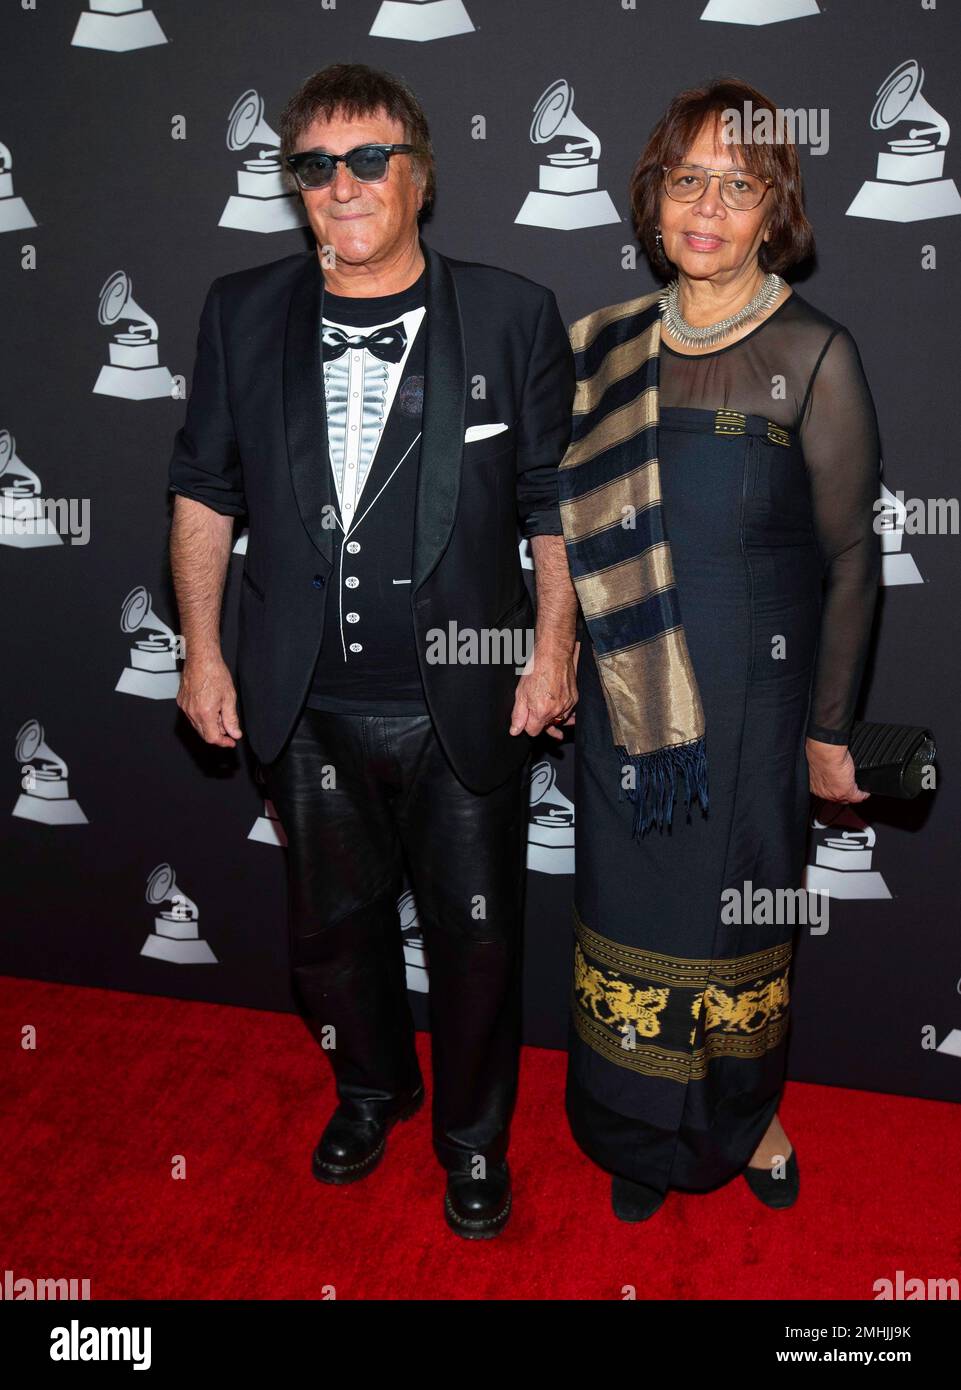 José Cid along with his Gabriela Carrascalao-Cid, arrive at the Latin Grammy special merit awards at the Waldorf Astoria Hotel, Wednesday, Nov. 13, 2019, in Las Vegas. (Photo by Eric Jamison/Invision/AP) Stock Photo